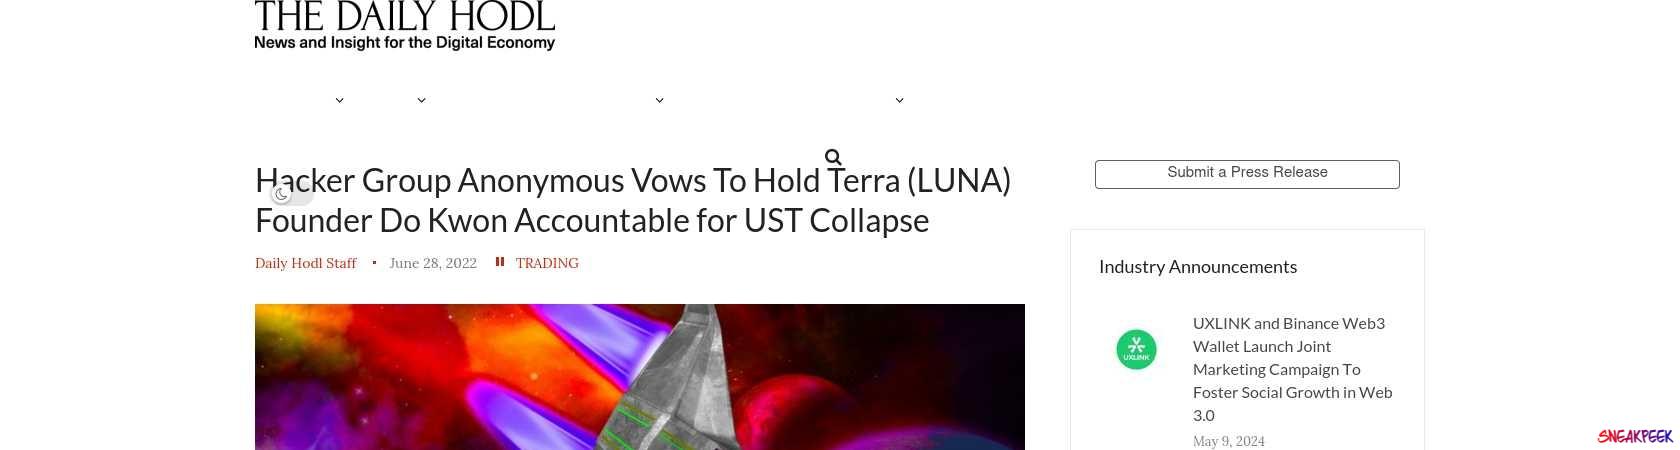 Read the full Article:  ⭲ Hacker Group Anonymous Vows To Hold Terra (LUNA) Founder Do Kwon Accountable for UST Collapse